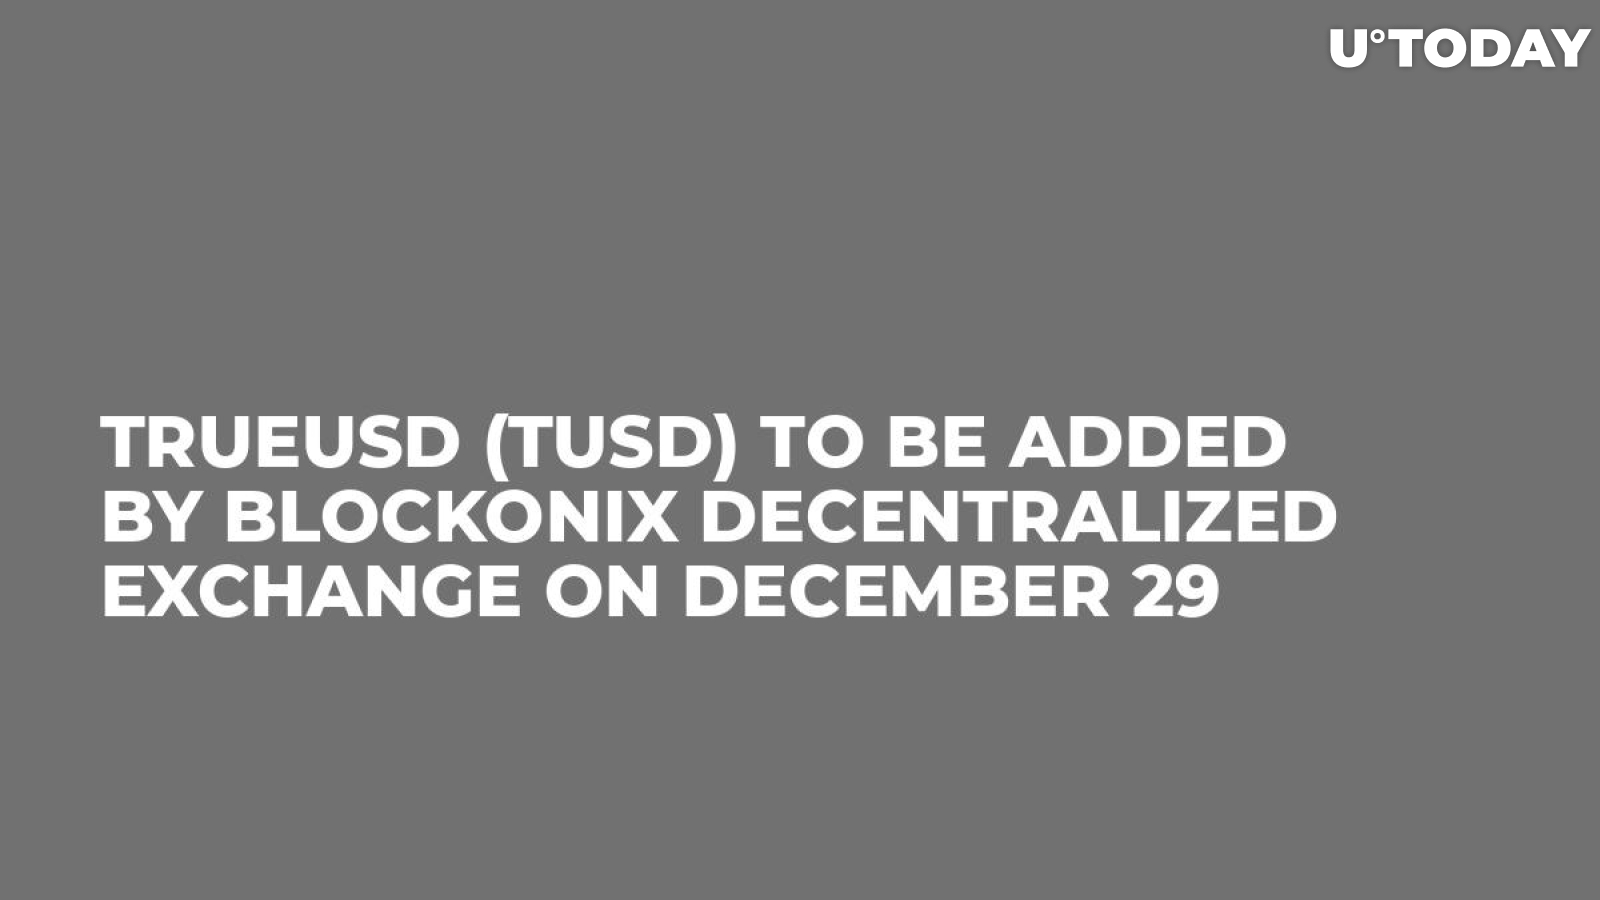 TrueUSD (TUSD) to Be Added by Blockonix Decentralized Exchange on December 29